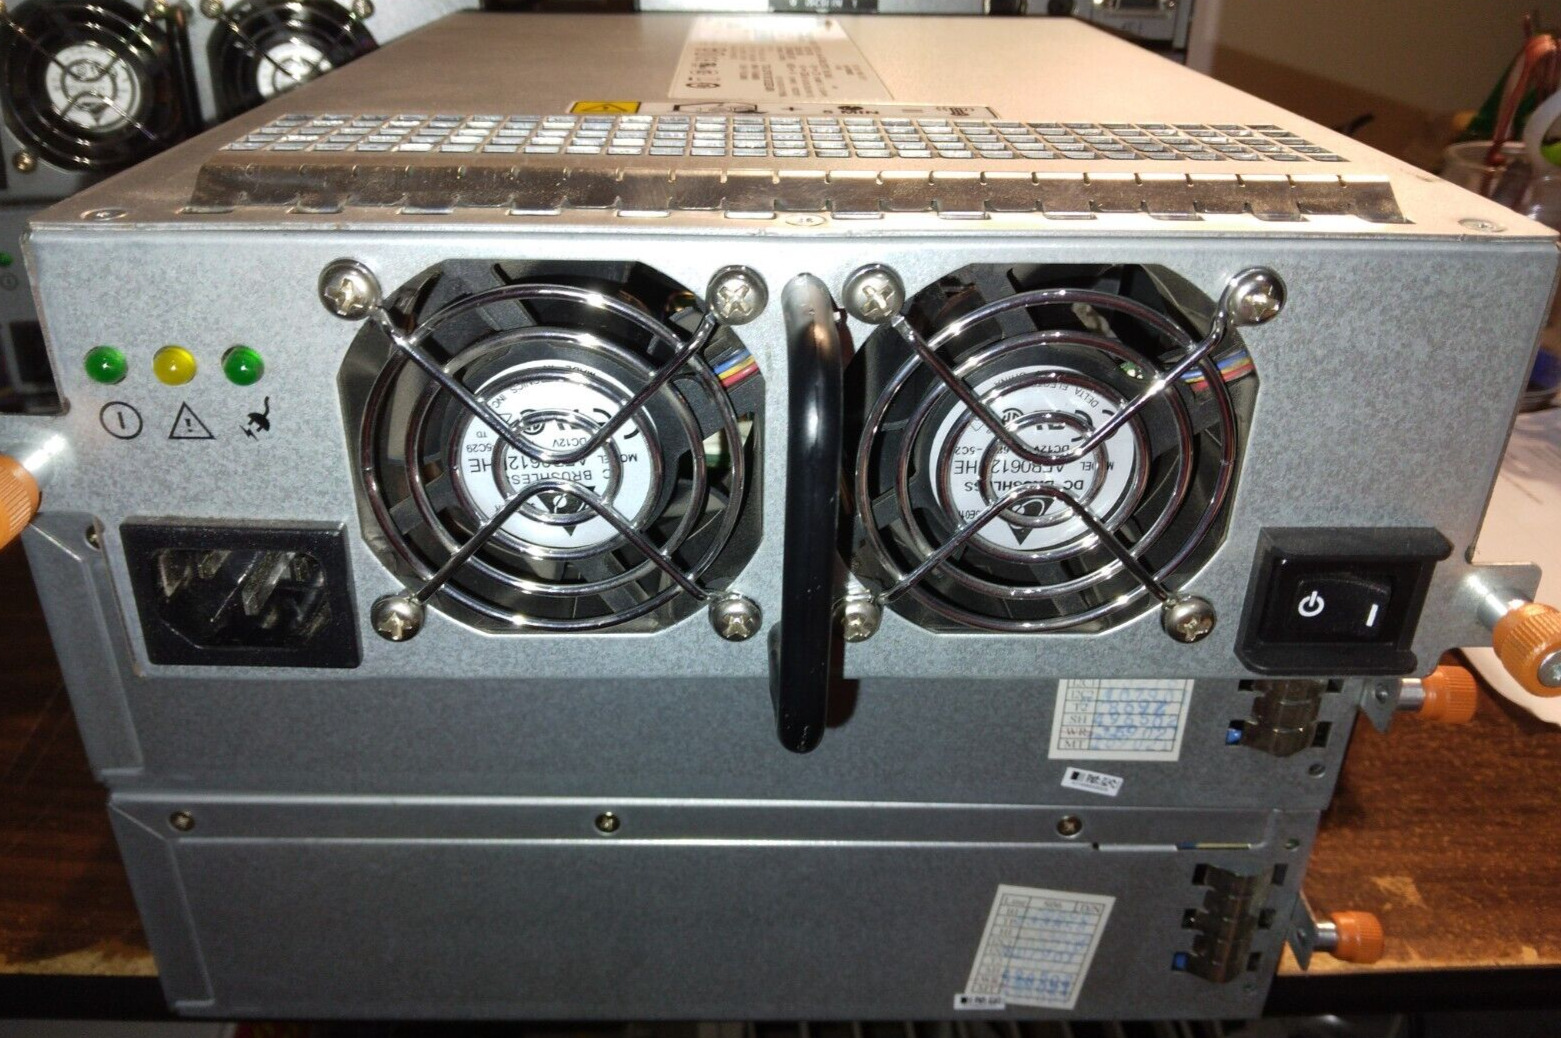 LOT OF 2 H703N Dell PowerVault 488W Power Supply 0H703N D488P-S0 DPS-488AB